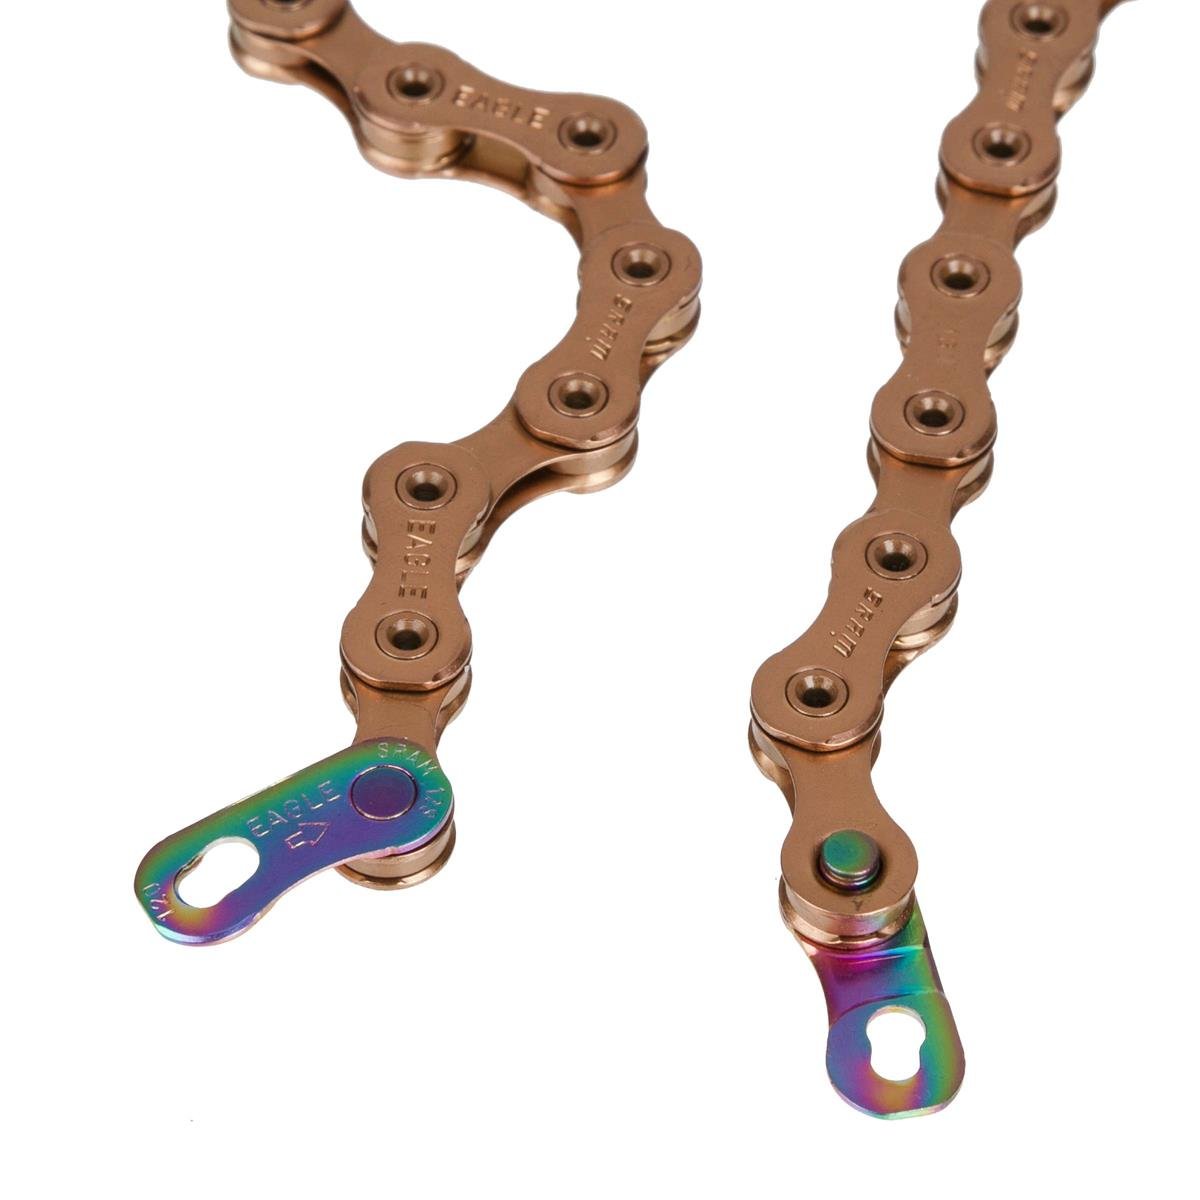 SRAM XX1 Eagle Chain - 12-Speed, 126 Links, Copper Chains 710845852169